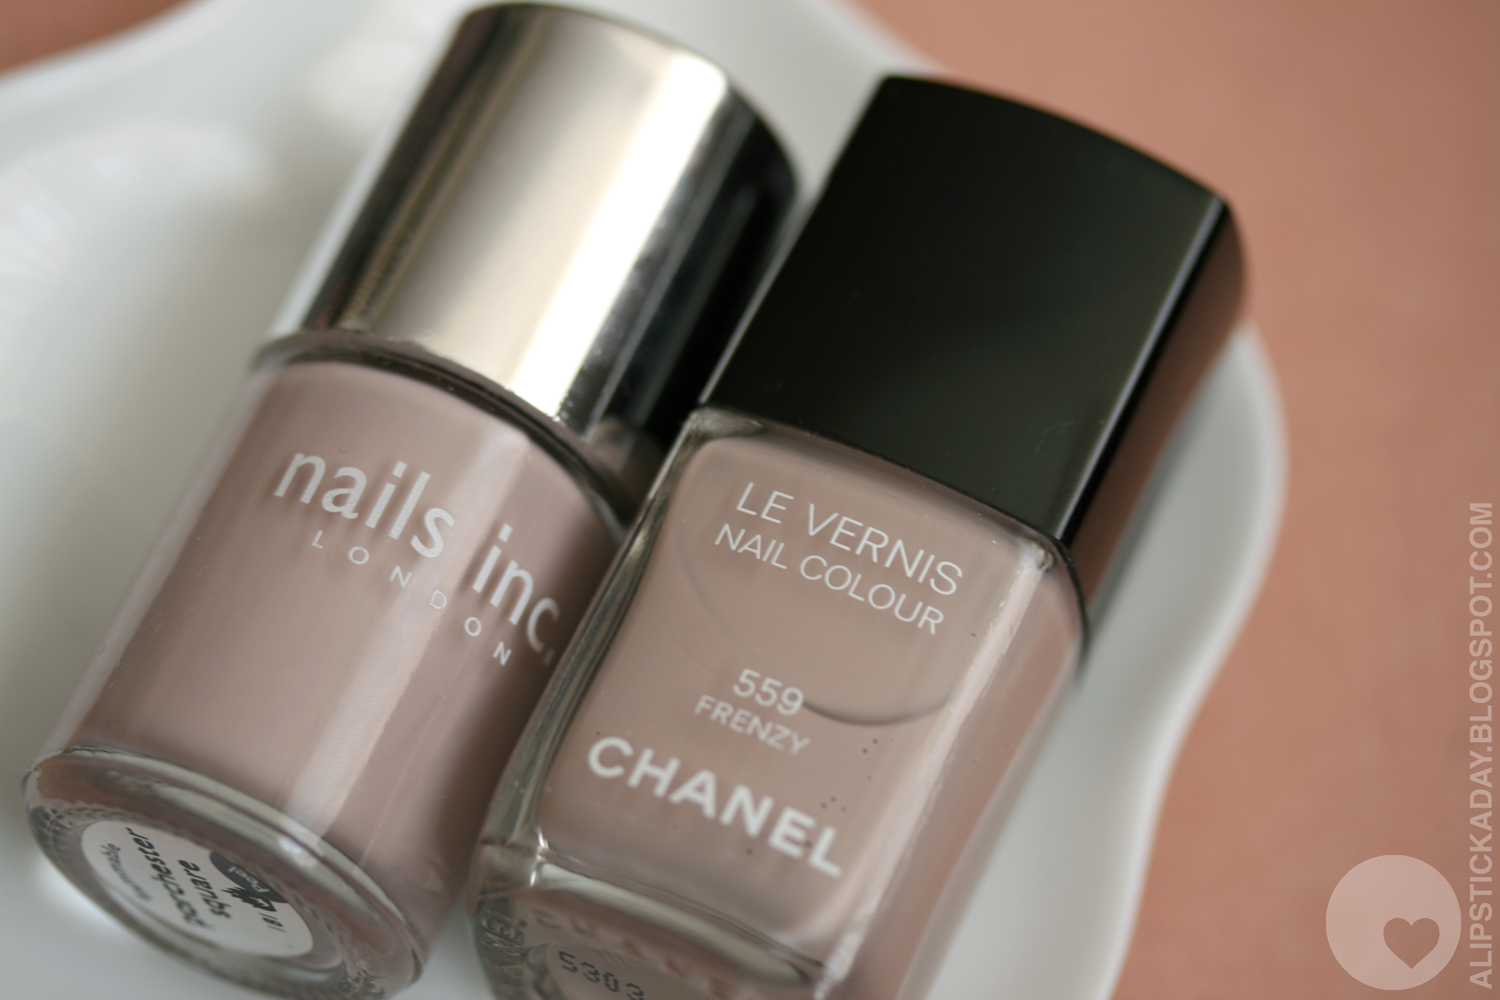 Chanel Le Vernis Longwear Nail Colour in Frenzy - wide 4